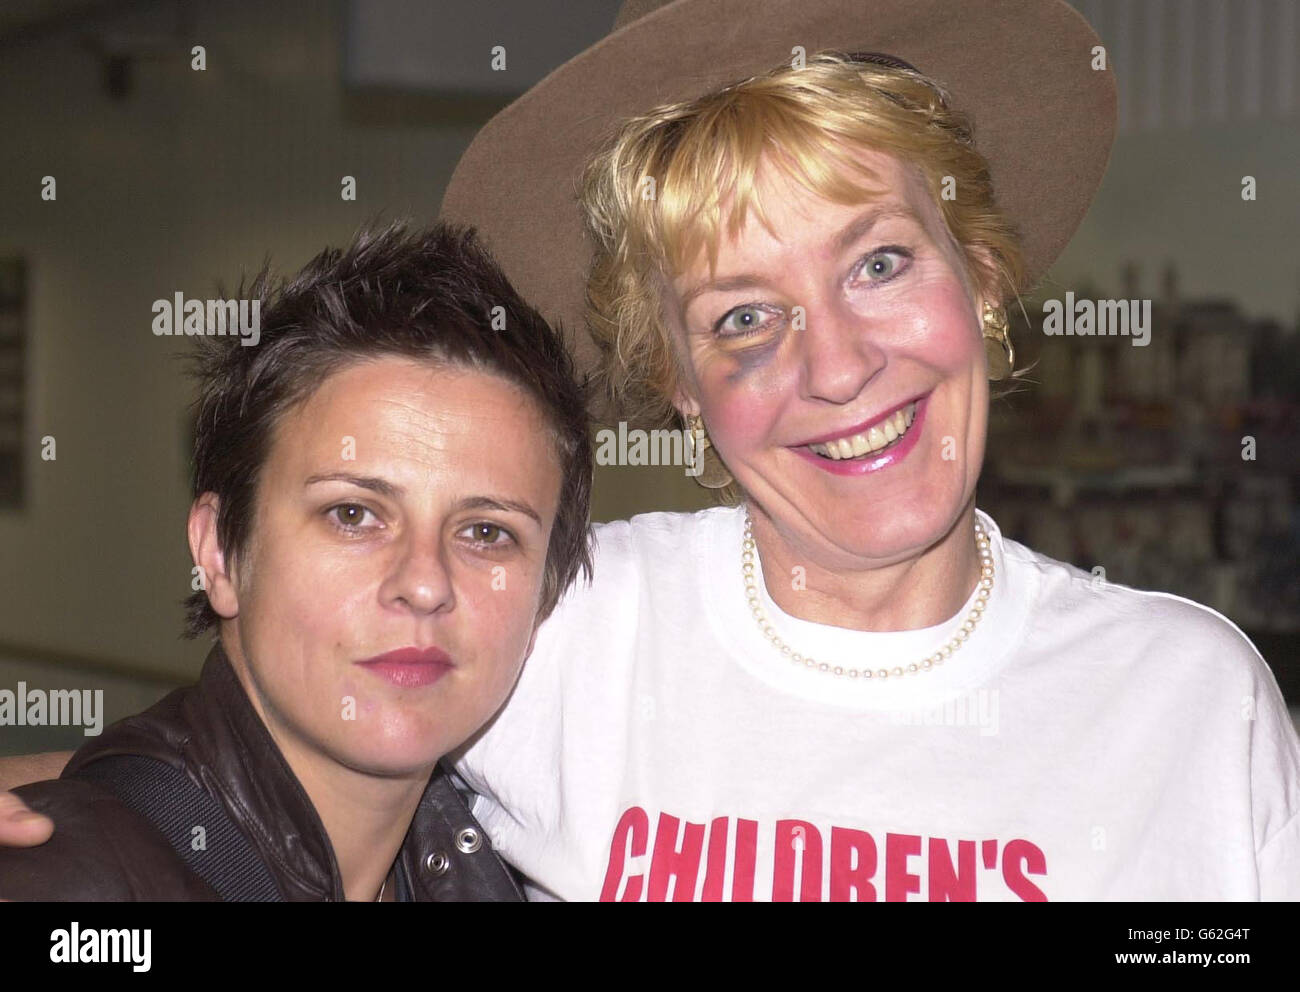 Rhona Cameron (left) and Christine Hamilton - the wife of former Tory MP Neil Hamilton - at London's Heathrow Airport, after returning from Australia where they had been competing in ITV's I'm A Celebrity ... Get Me Out Of Here! * The show was won by veteran DJ Tony Blackburn. Stock Photo